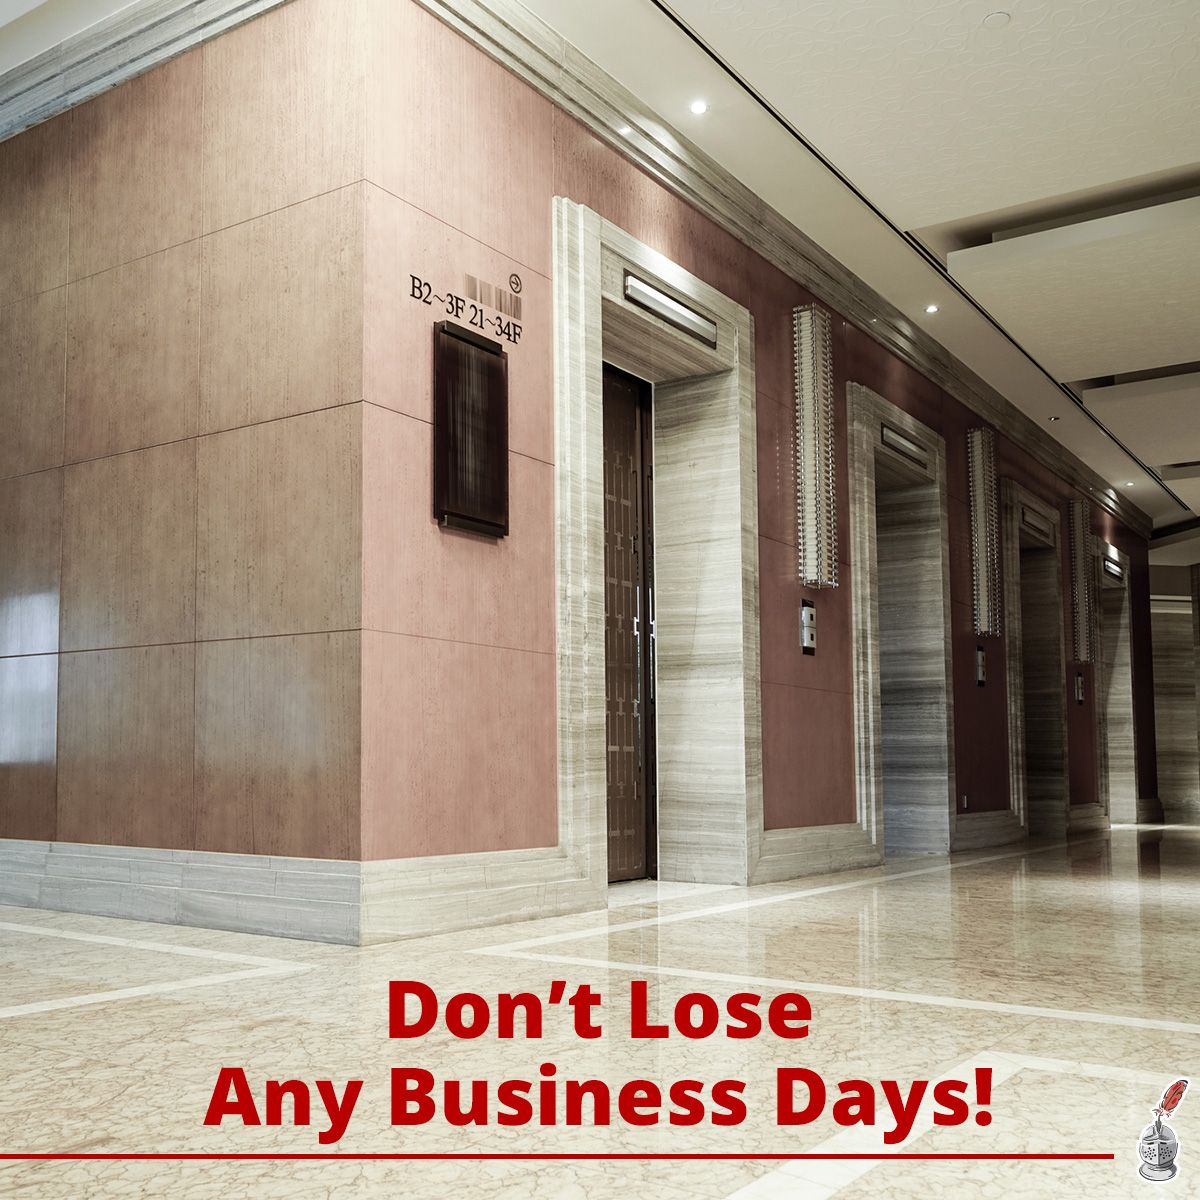 Don't Lose Any Business Days!